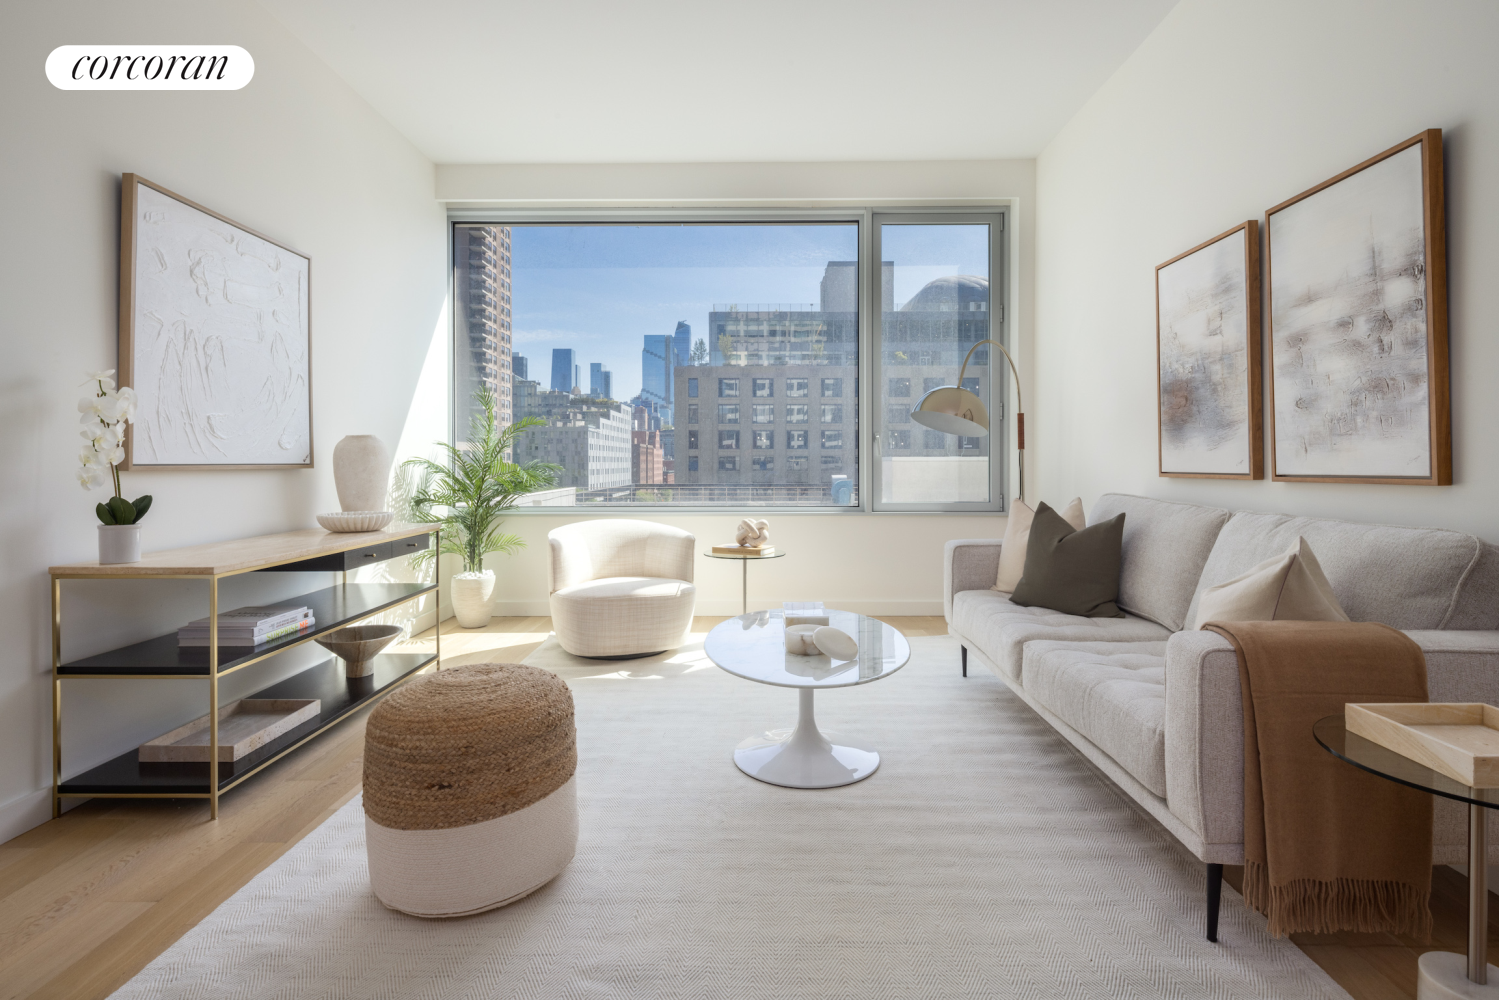 611 West 56th Street 4C, Middle West Side, Midtown West, NYC - 2 Bedrooms  
2 Bathrooms  
4 Rooms - 